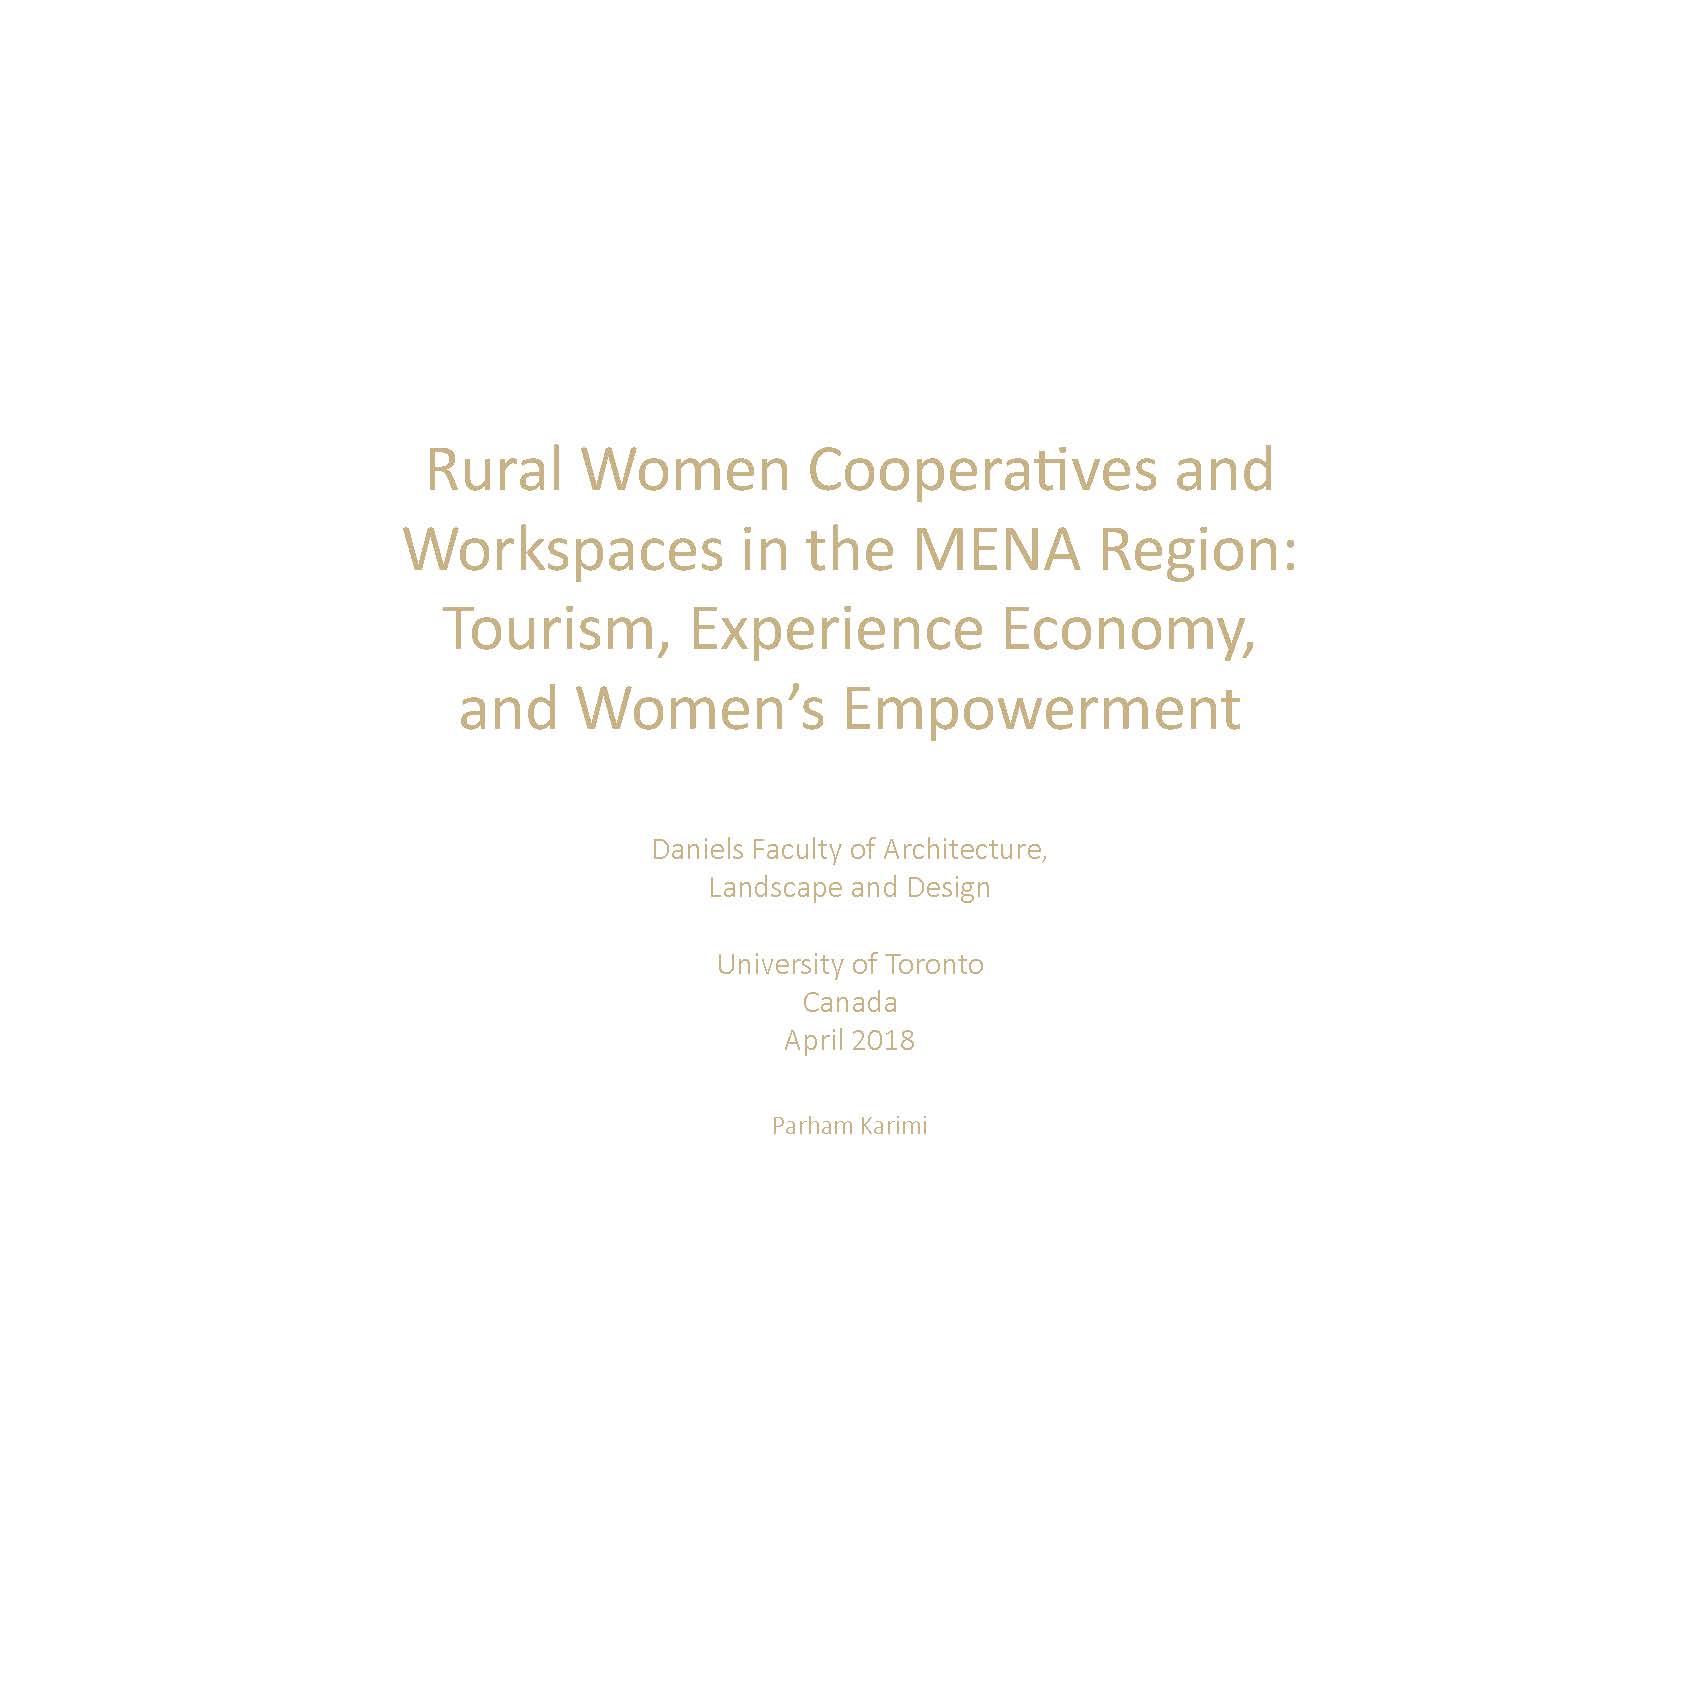 Rural Women Cooperatives and Workspaces in the MENA Region: Tourism, Experience Economy, and Women's Empowerment